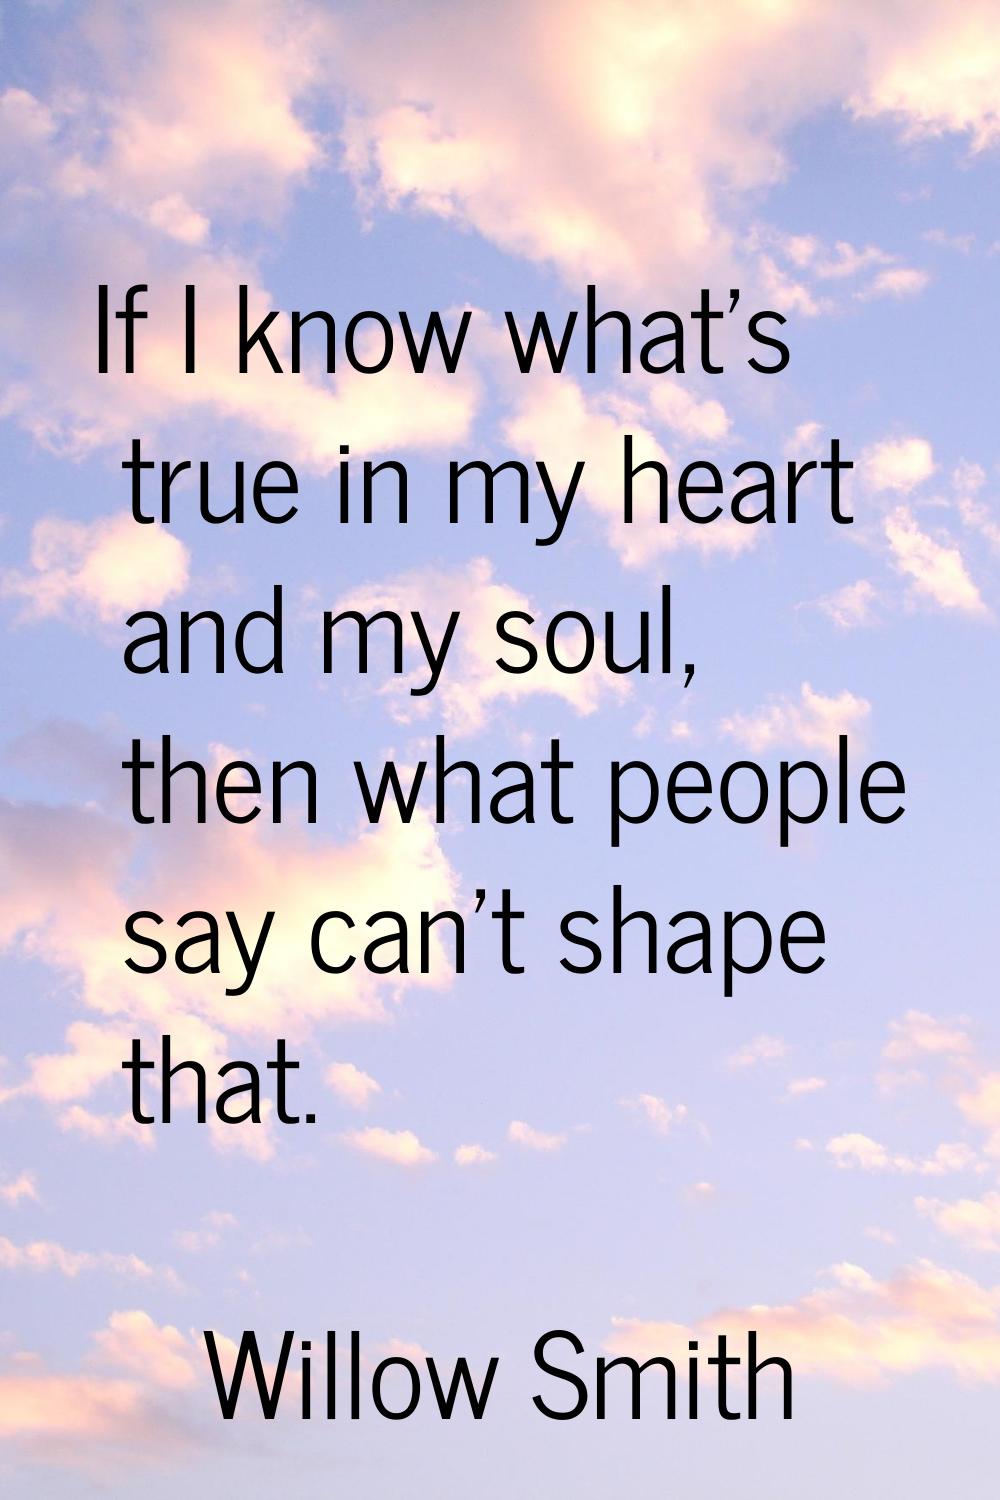 If I know what's true in my heart and my soul, then what people say can't shape that.